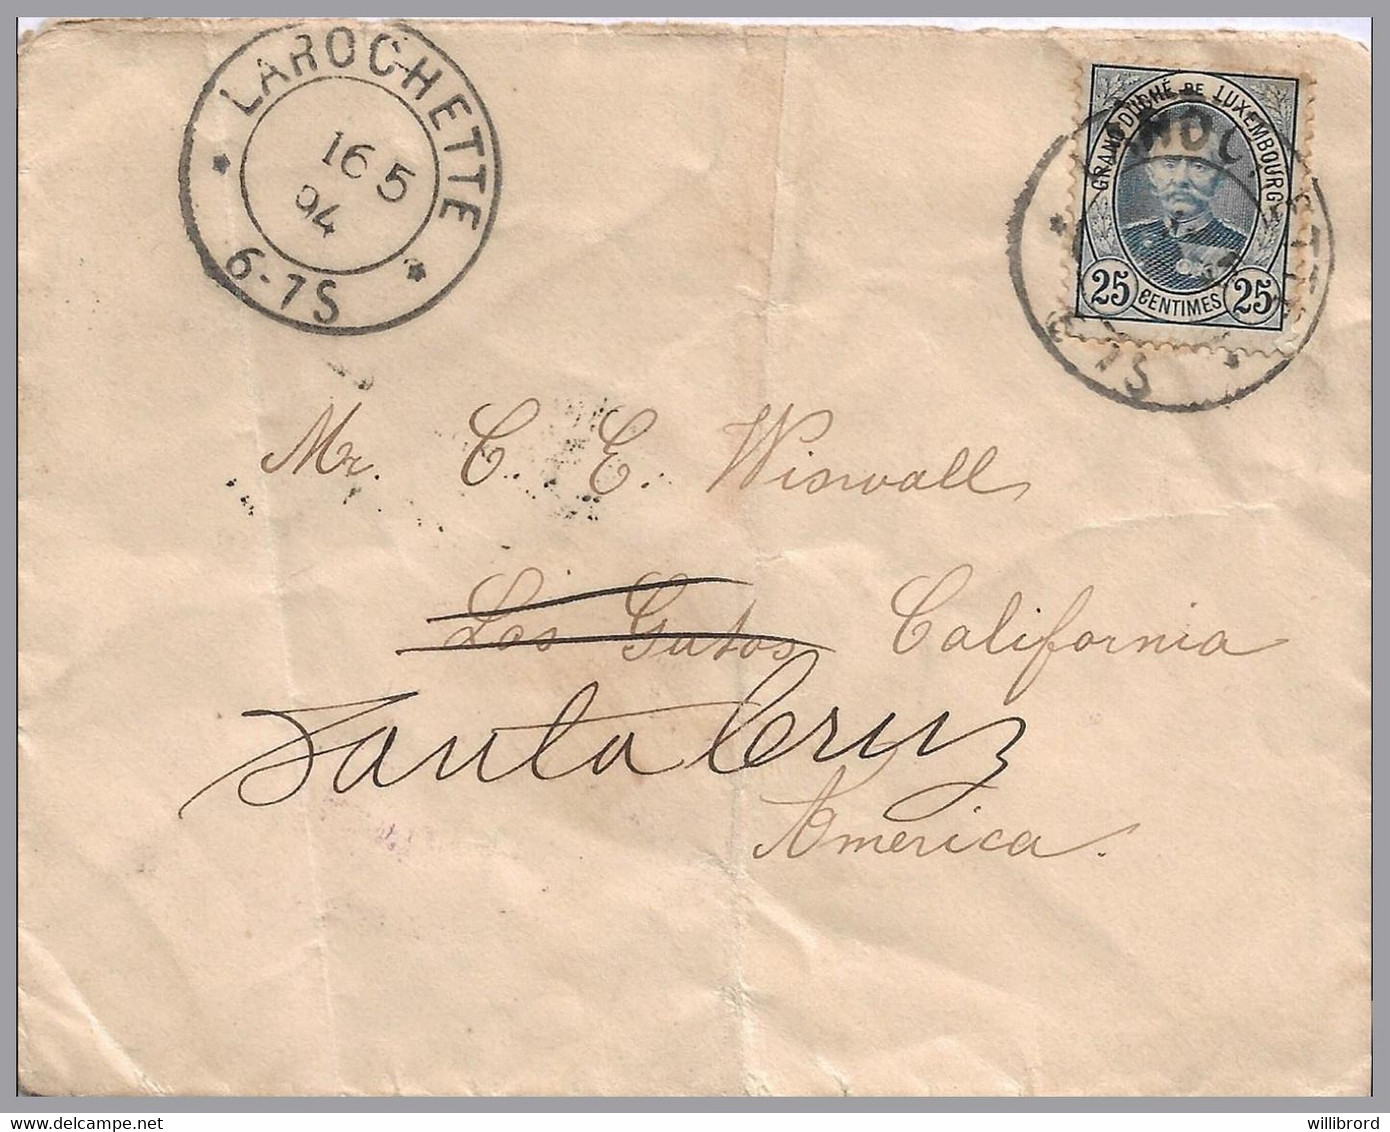 LUXEMBOURG - Adolphe 25c - LAROCHETTE - 1894 UPU-rate Cover To USA - Redirected - 1891 Adolphe De Face